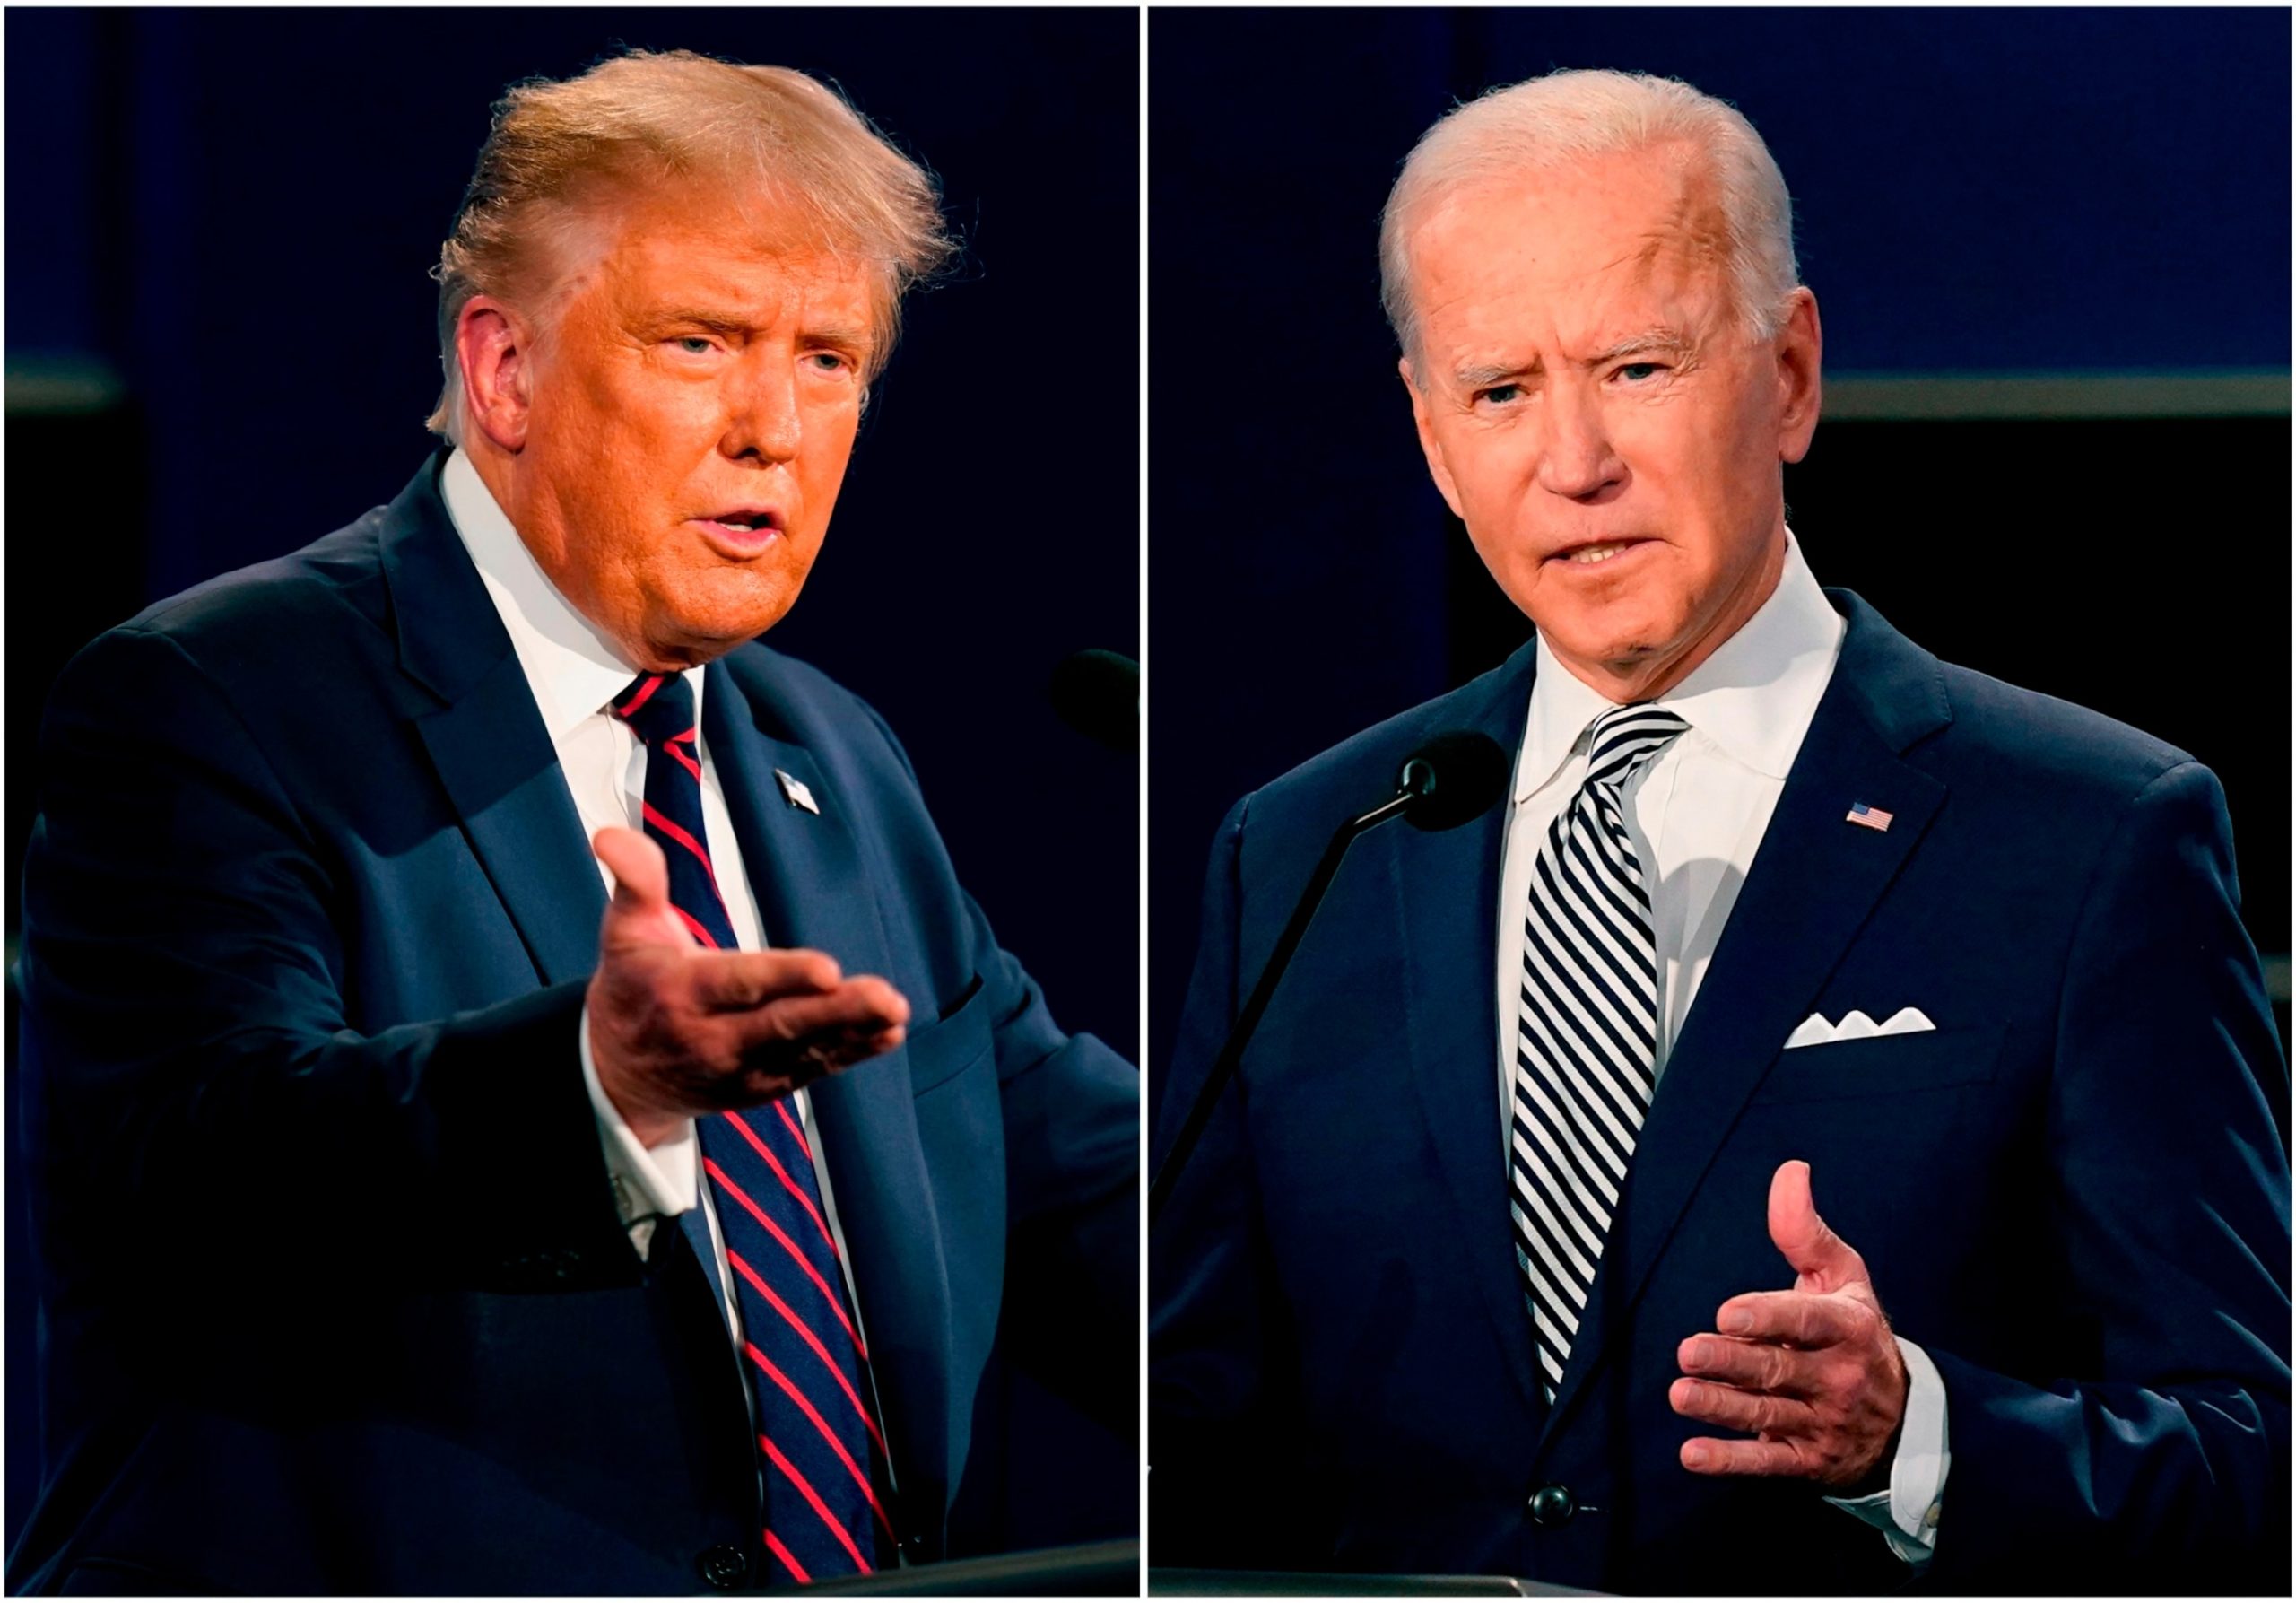 How to watch the 1st Biden-Trump debate tonight and what time it starts